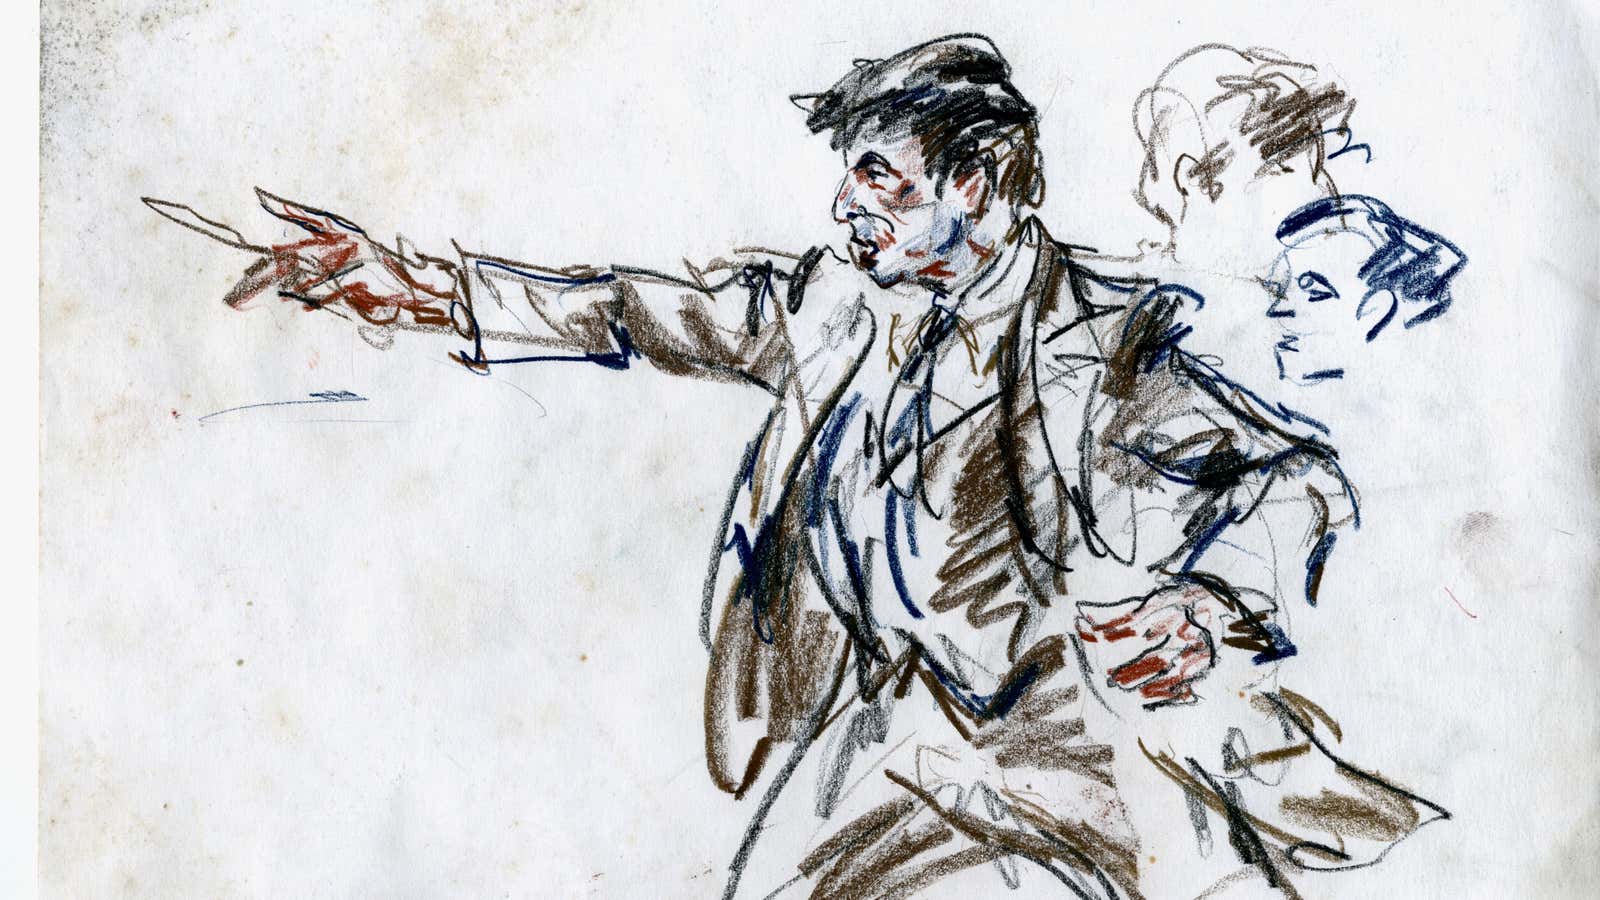 Courtroom sketch artist has front row seat to justice | CNN-gemektower.com.vn